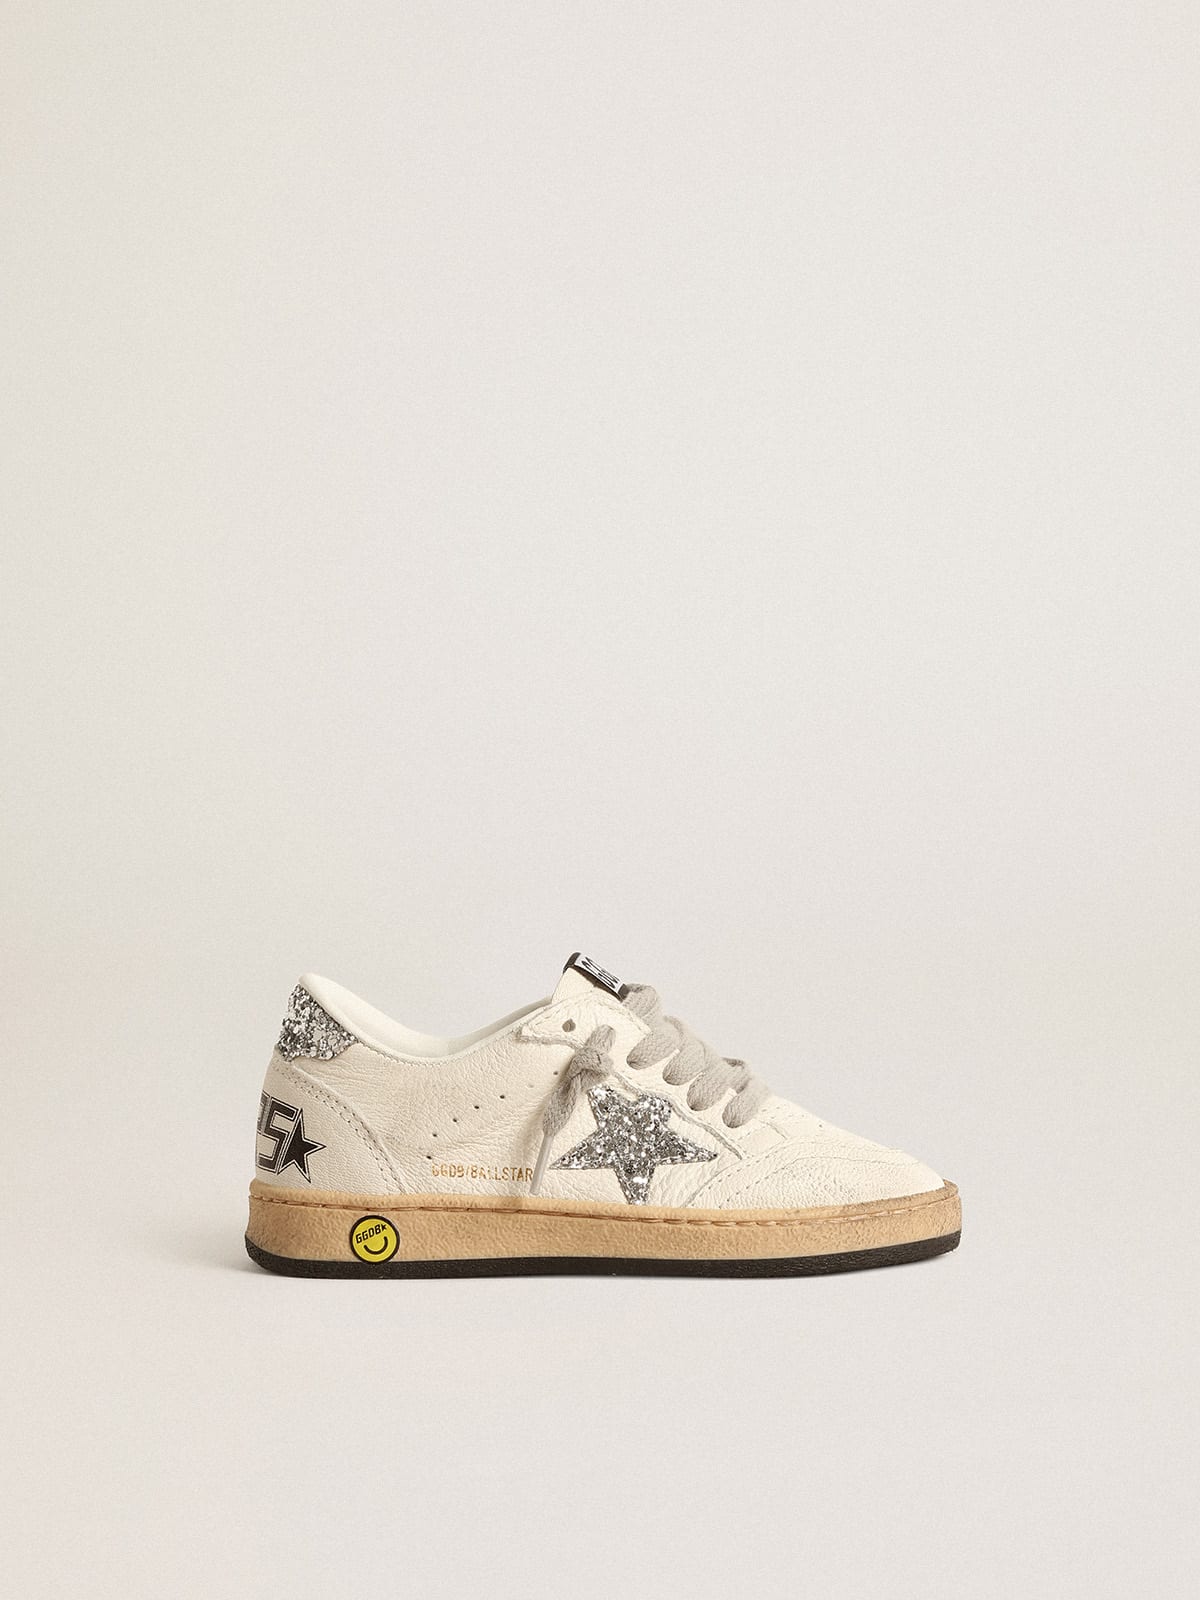 Golden Goose Ball Star Junior in nappa with silver glitter star and ...